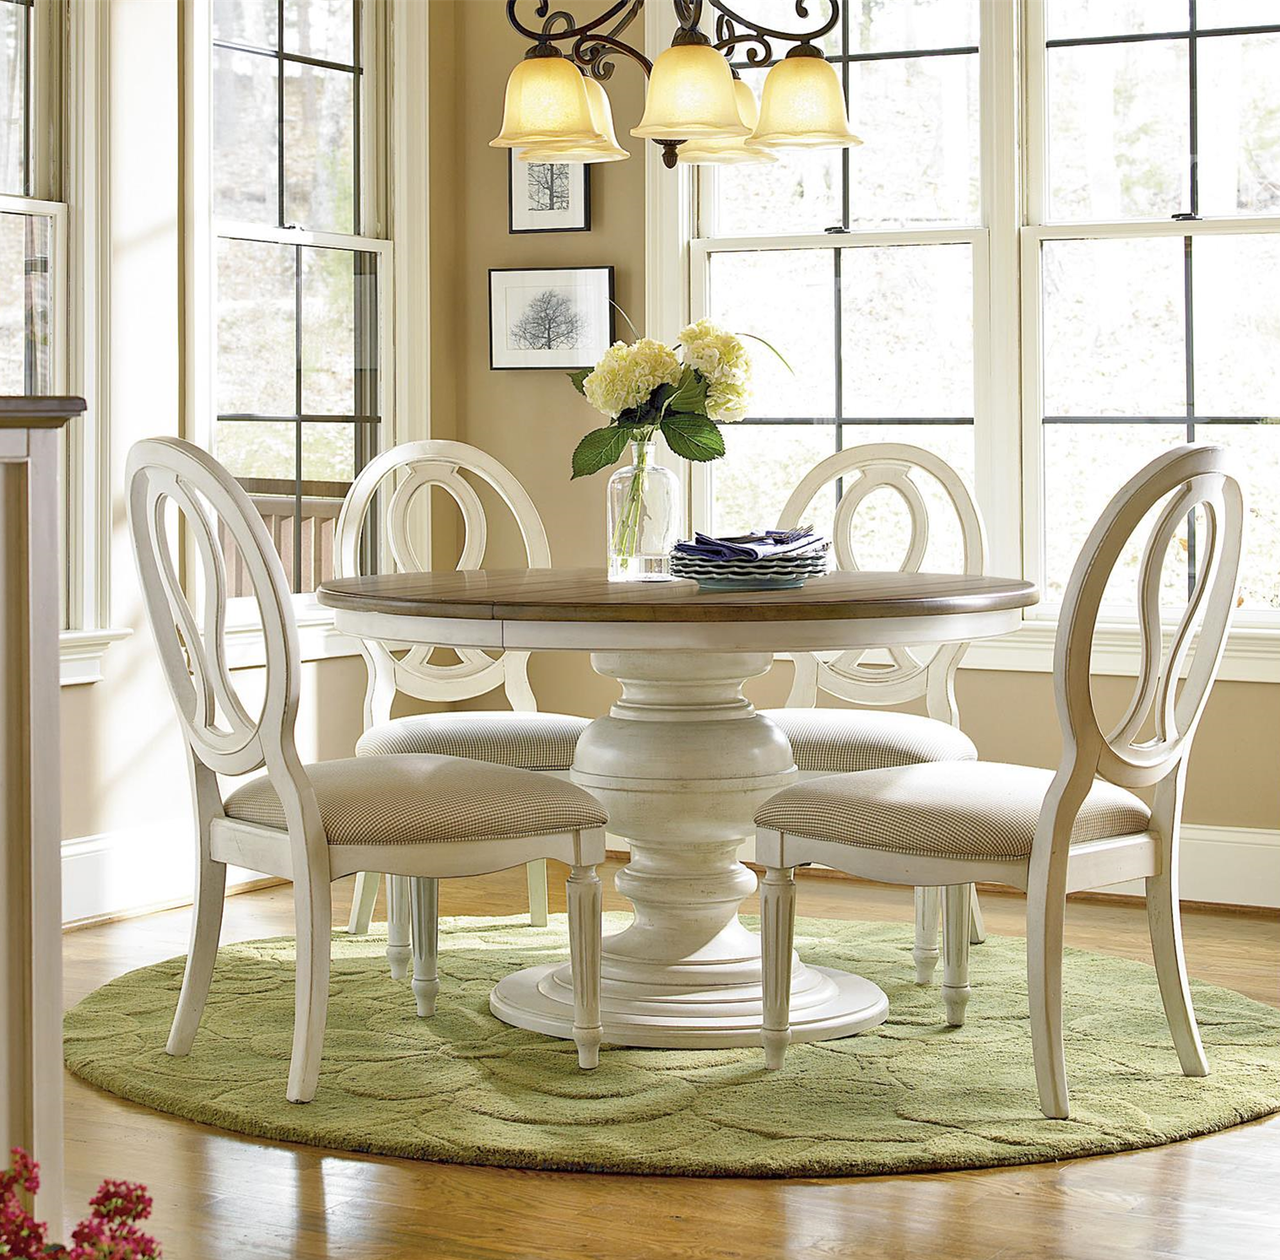 Country-Chic 5 Piece Round White Dining Table Set | Zin Home